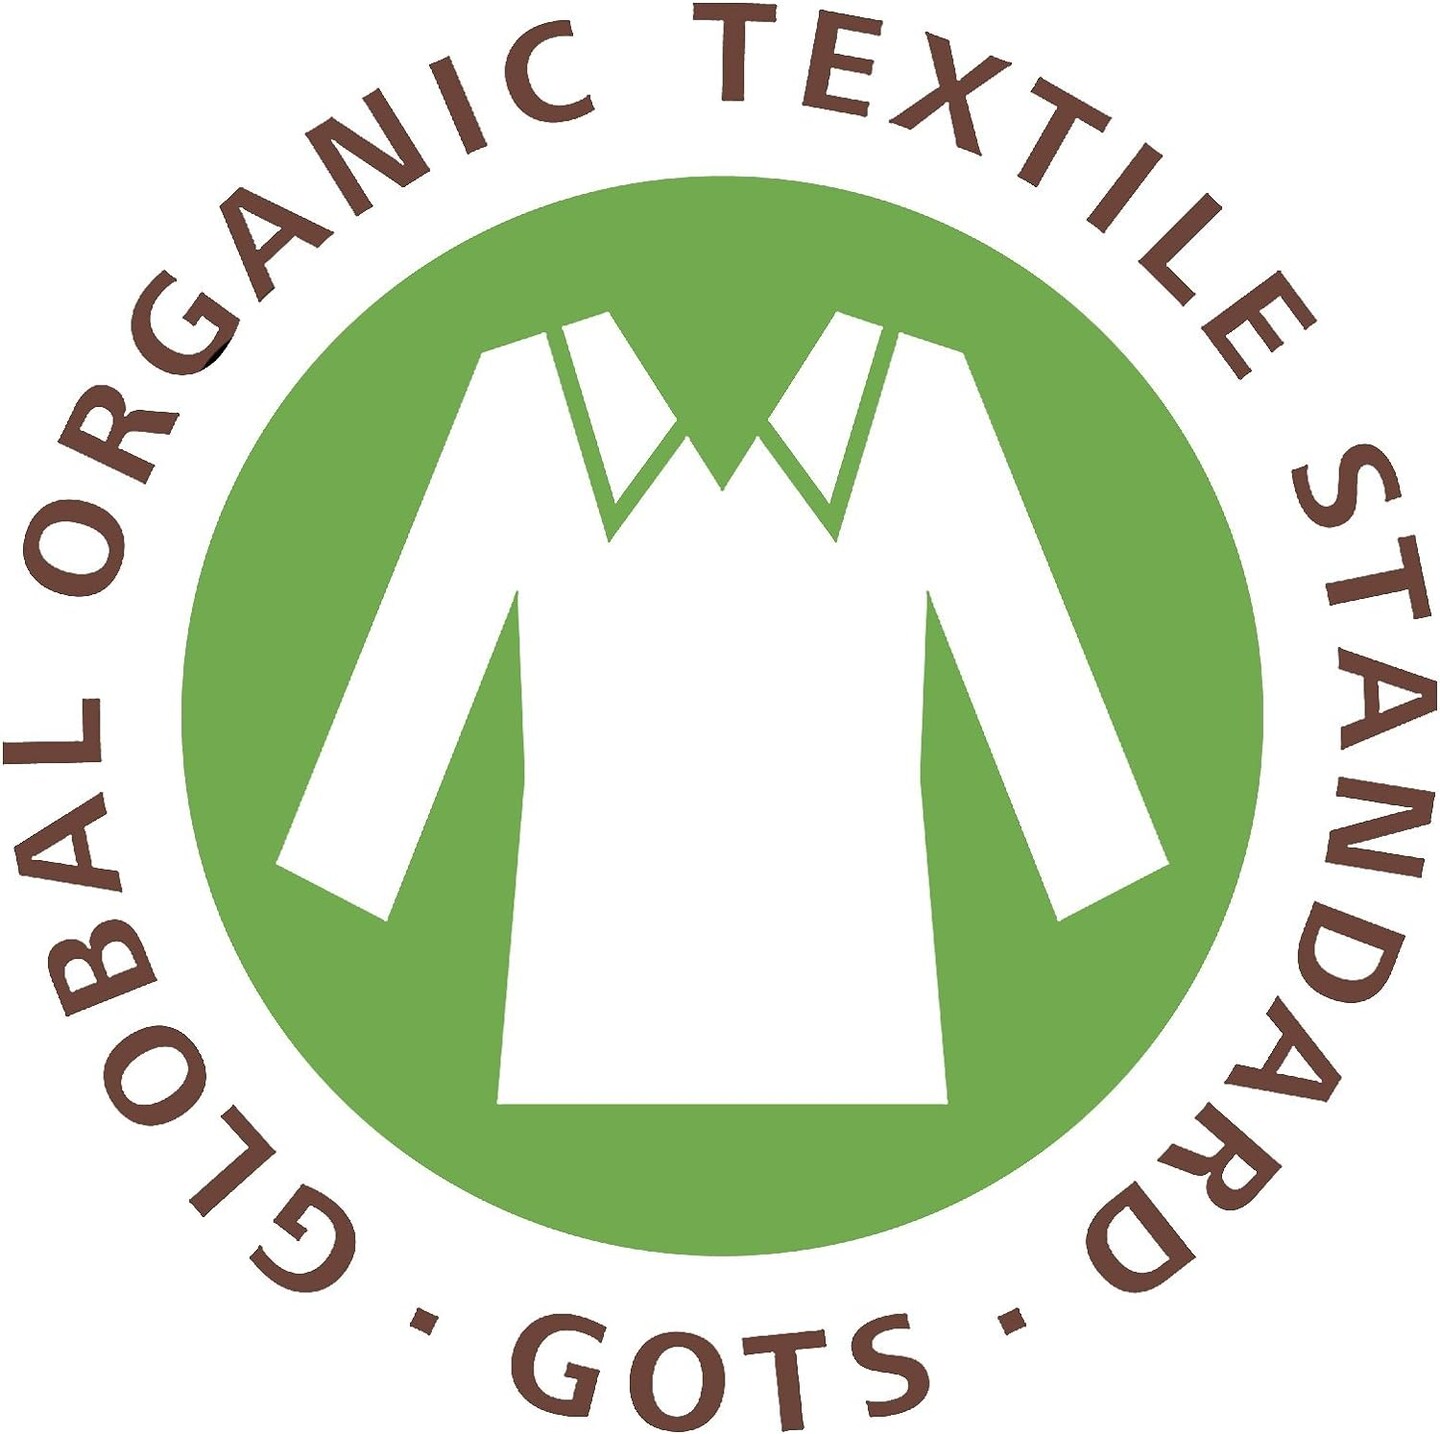 CERTIFIED ORGANIC MERINO Wool Roving. Ethically &#x26; Responsibly Sourced Combed Top Fiber. Spinning, Felting, Filling - 1 lb Bag, Natural White